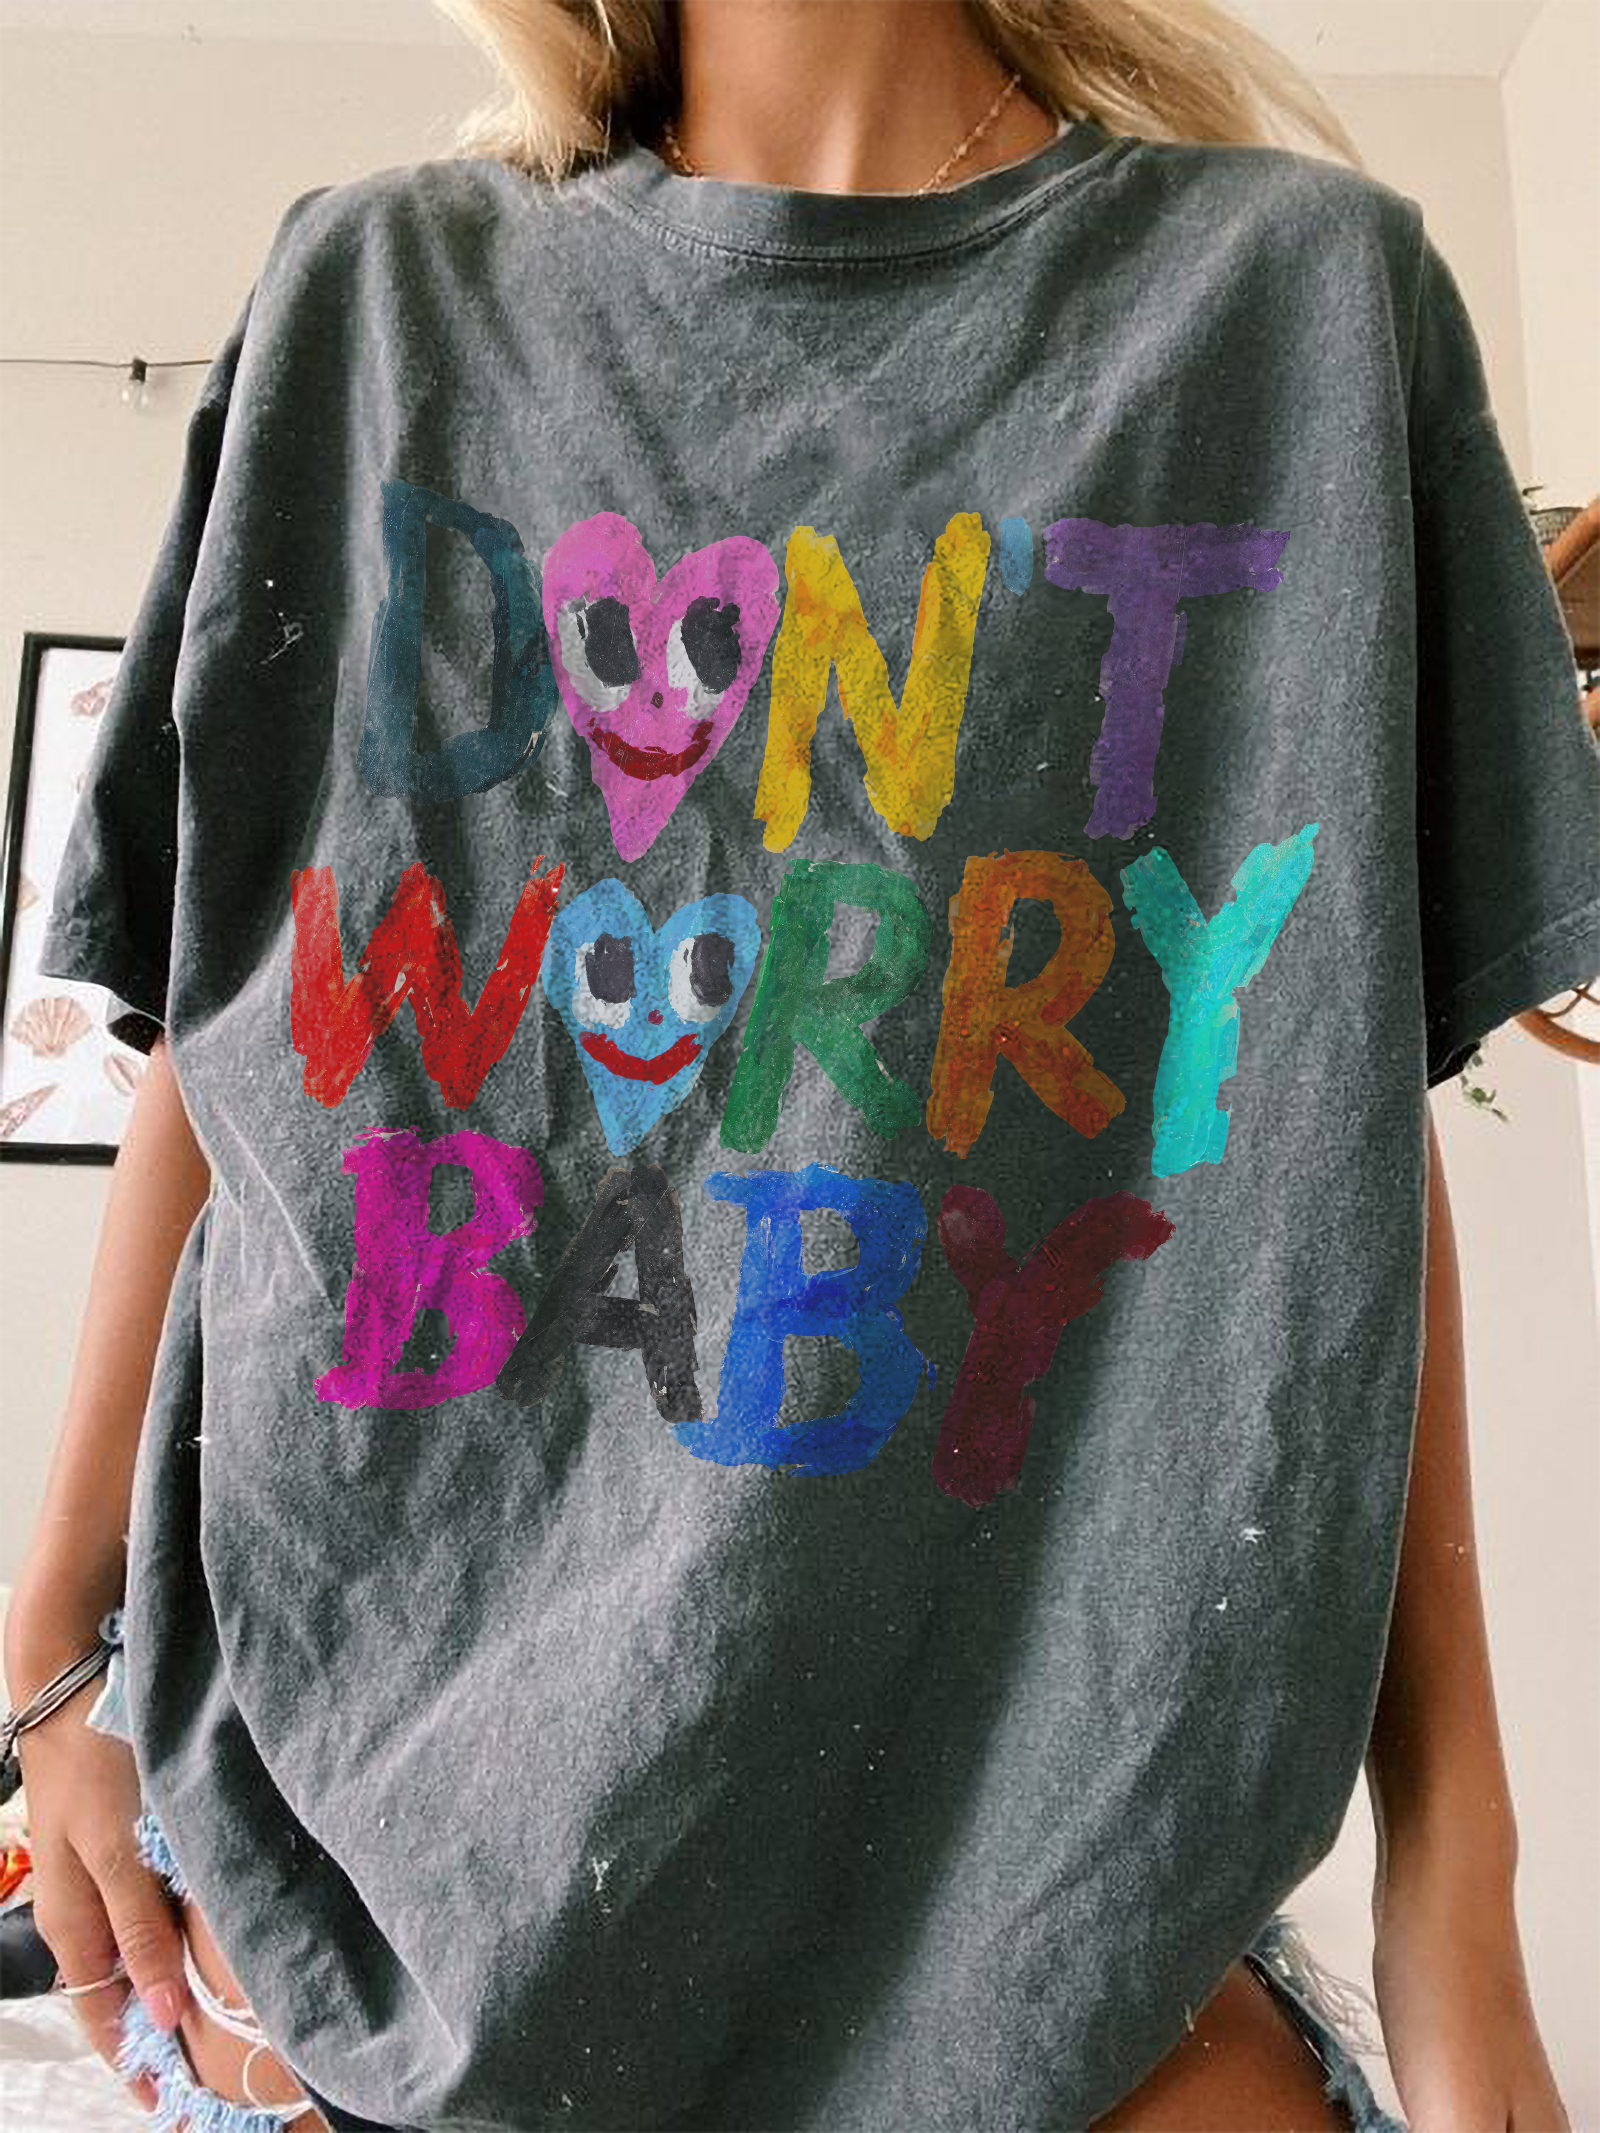 Don't worry baby  Printed Oversized Unisex T-shirt